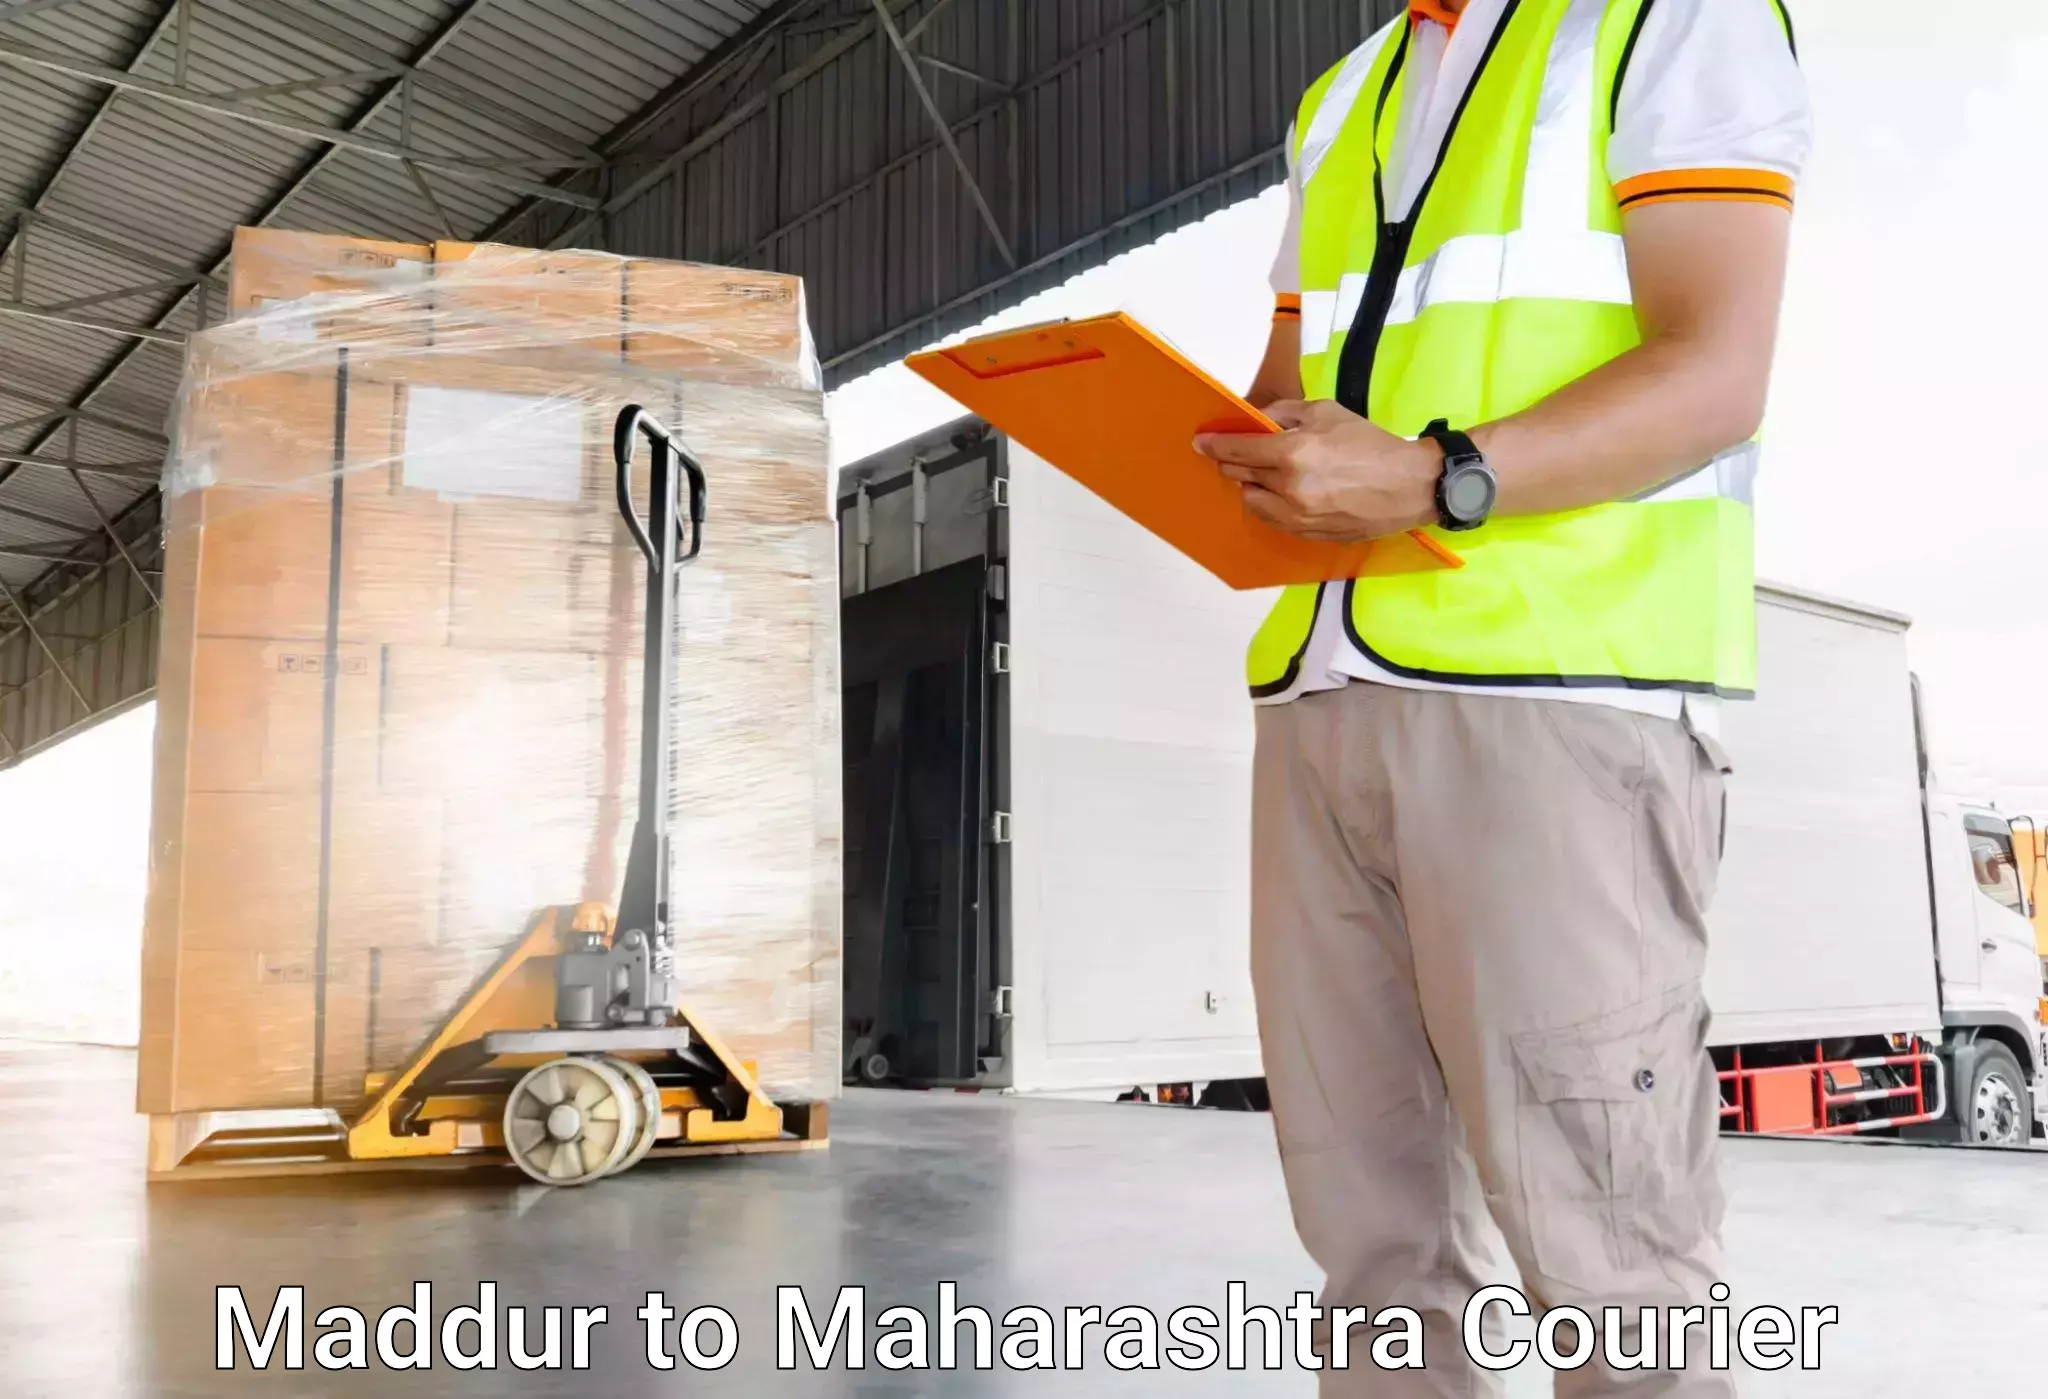 Luggage transport company in Maddur to Jamkhed